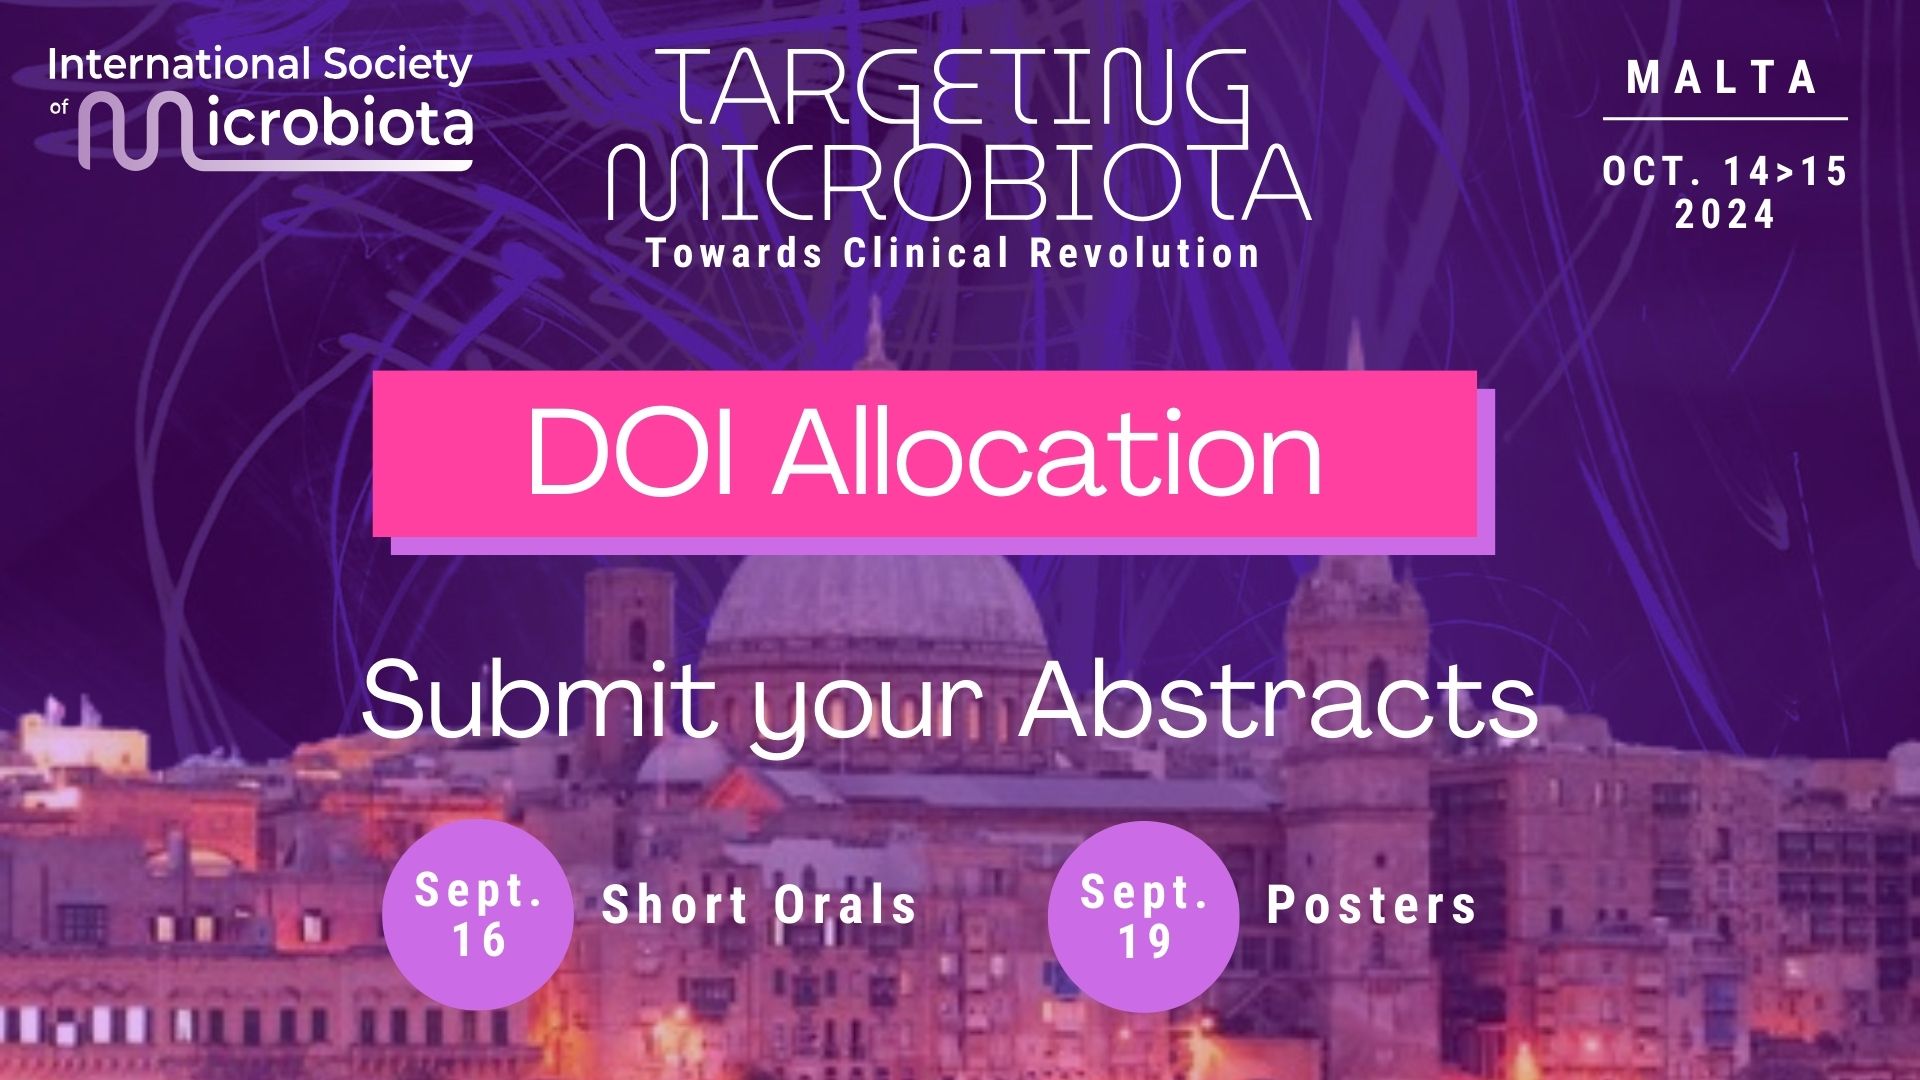 DOI Allocation for Targeting Microbiota 2024 Abstracts